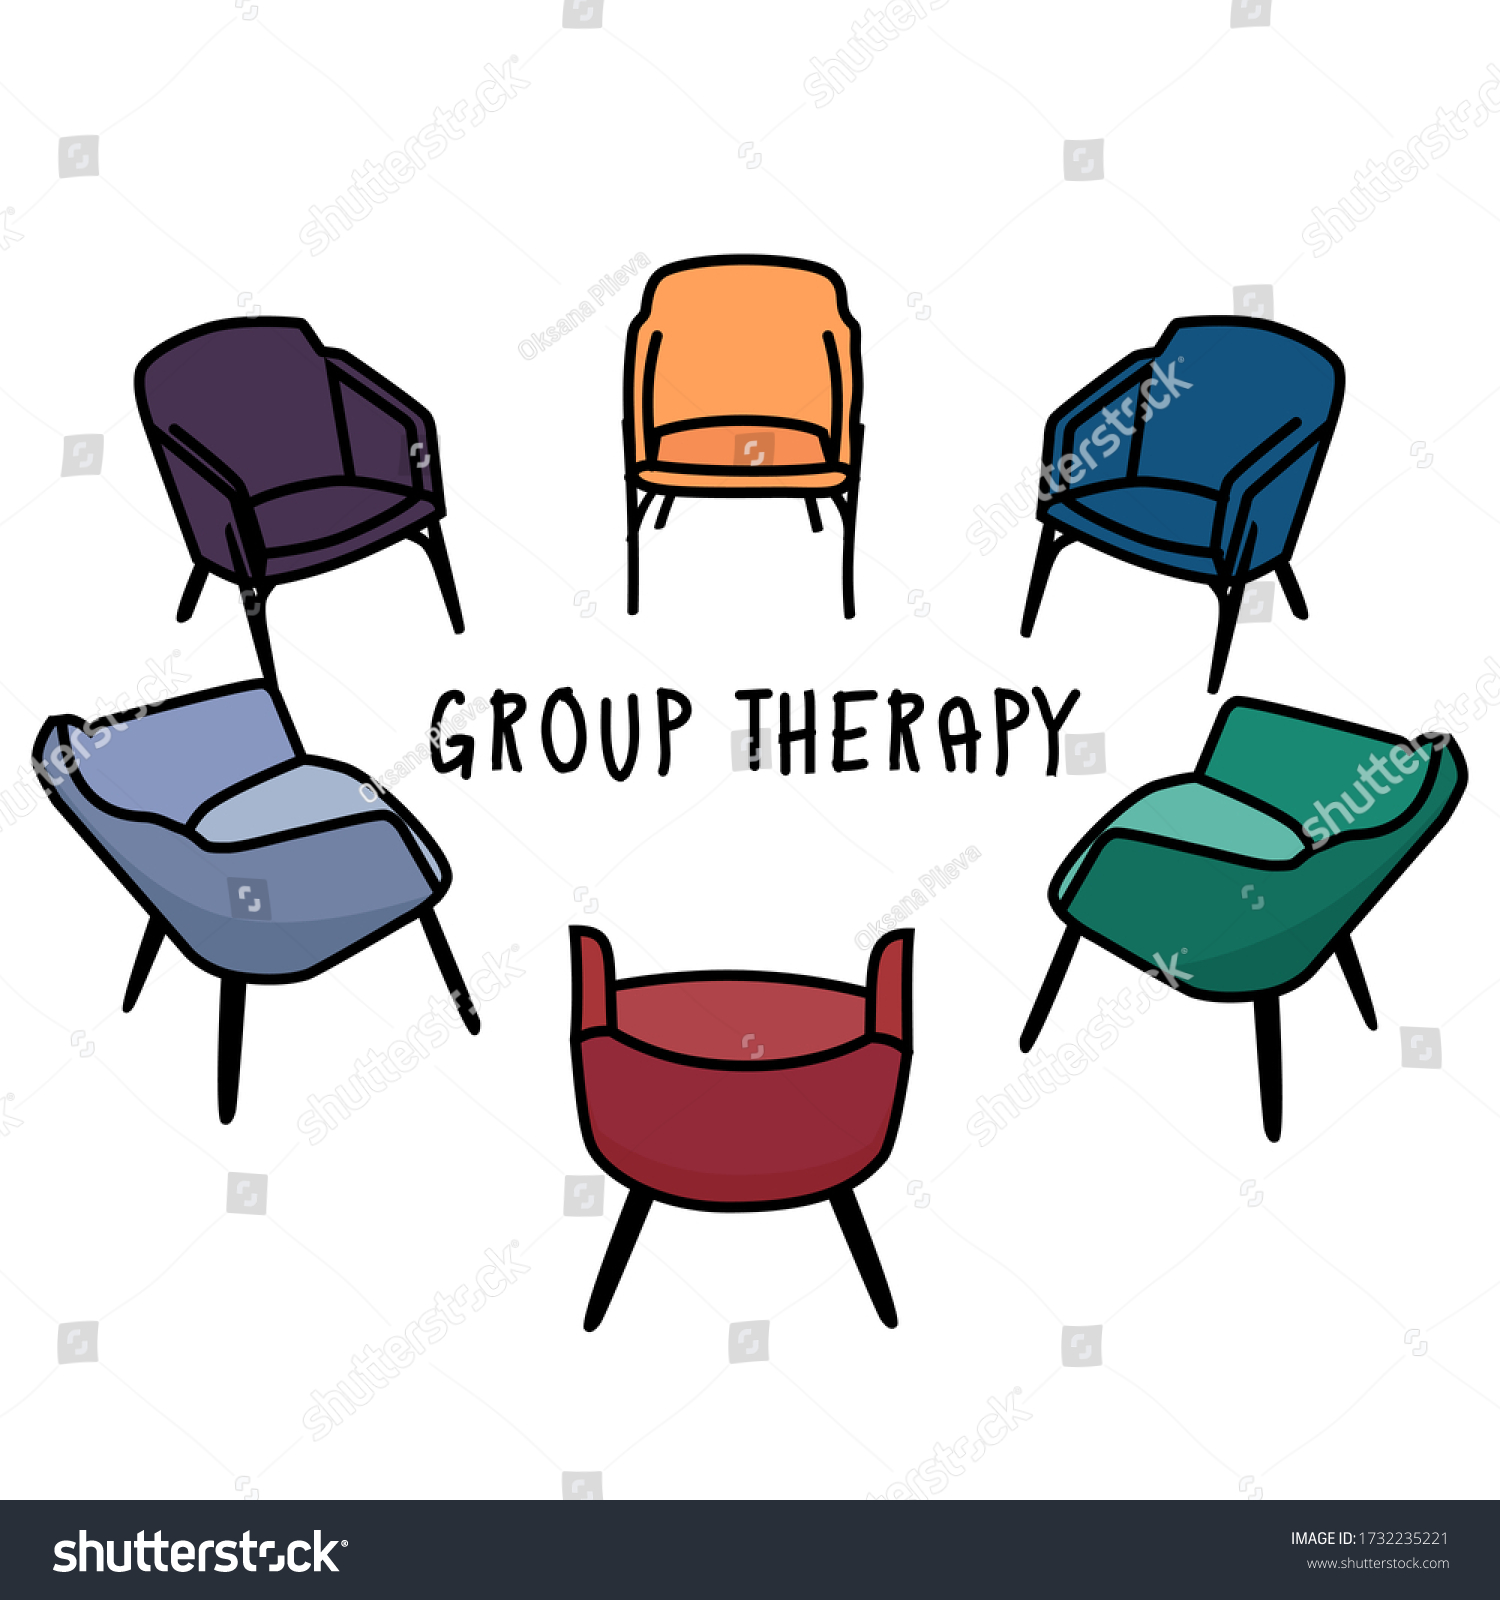 SVG of Psychology. Group therapy. The chairs are arranged in a circle. Concept of psychological problems. svg